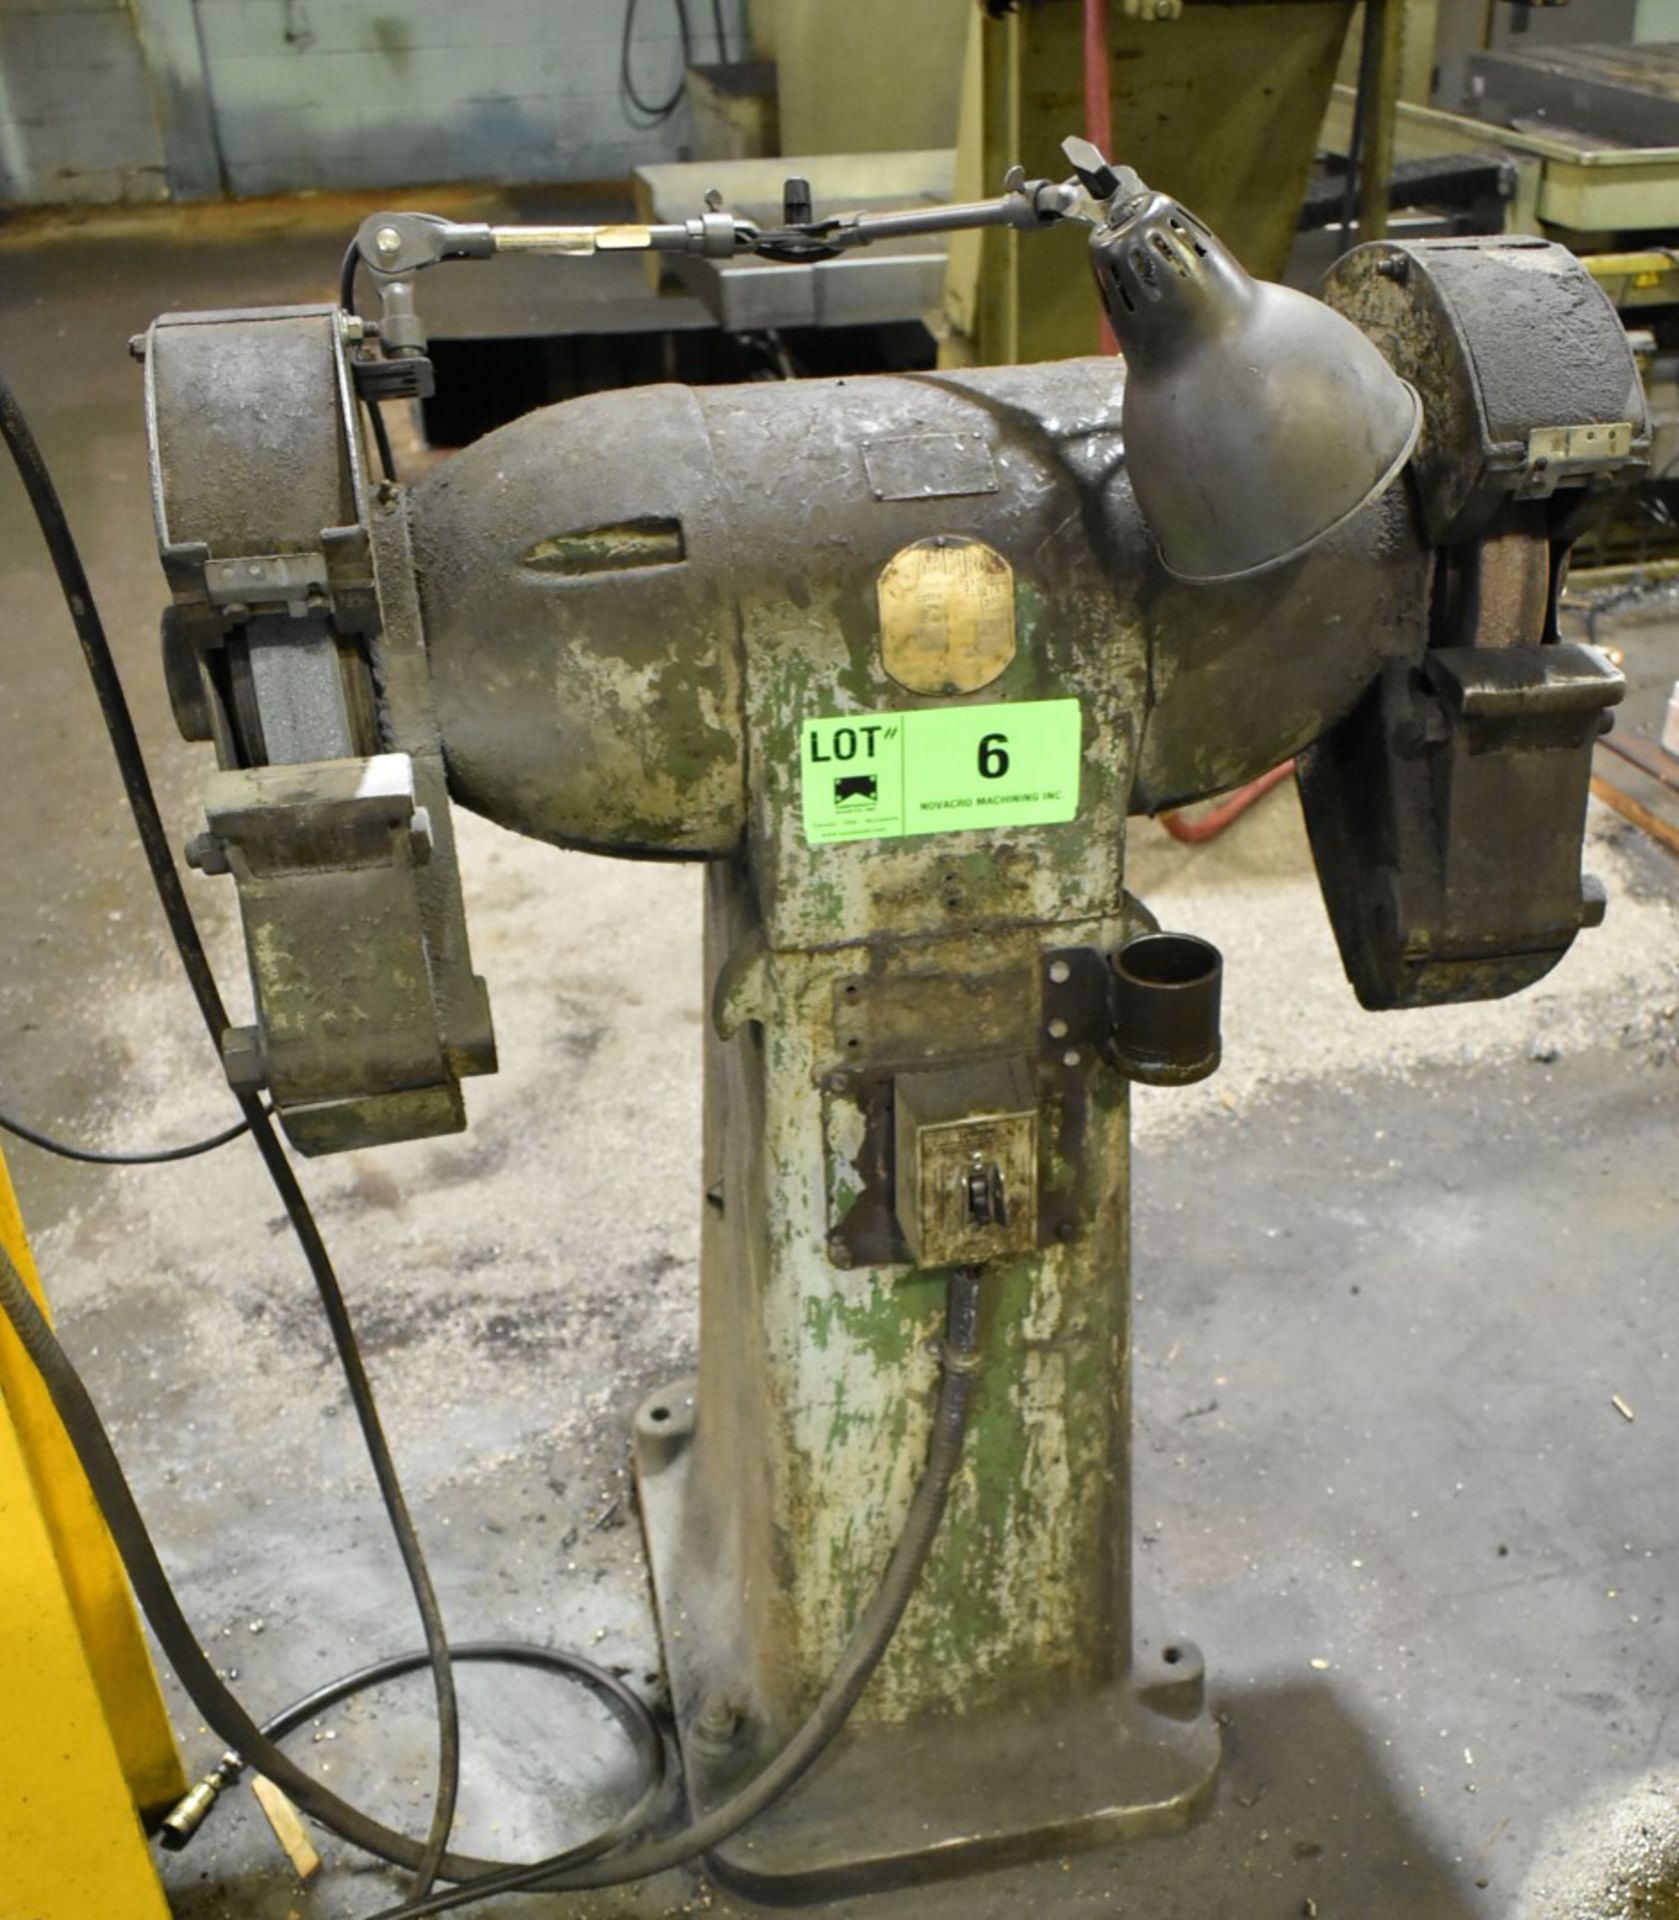 STAMFORD 12" DOUBLE END PEDESTAL GRINDER WITH SPEEDS TO 1750 RPM, S/N: 3199/1 (CI) [RIGGING FEE